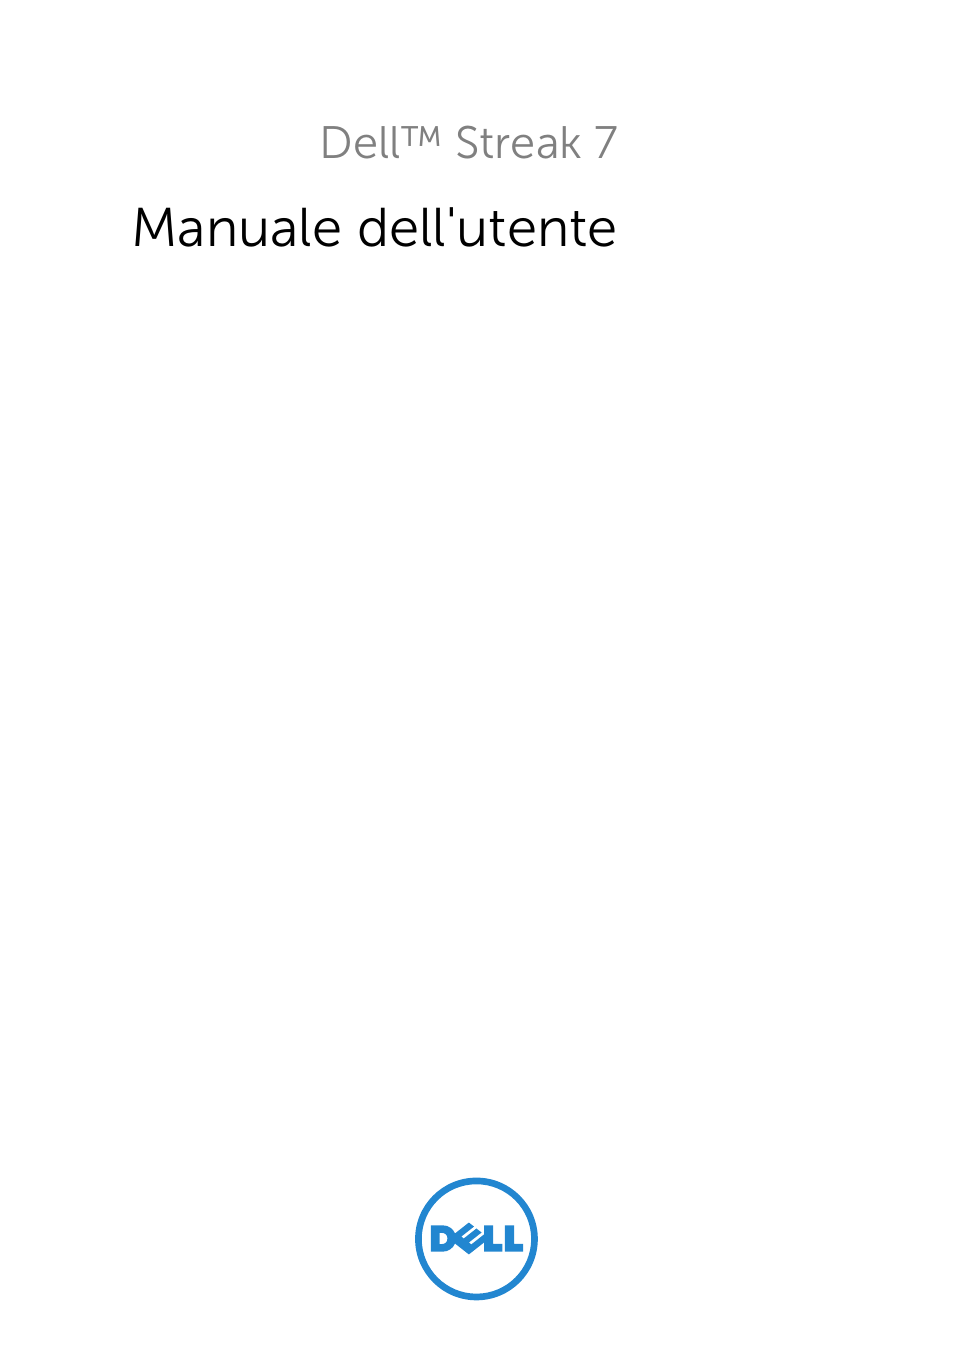 Dell Mobile Streak 7 Wifi Only Manuale d'uso | Pagine: 151